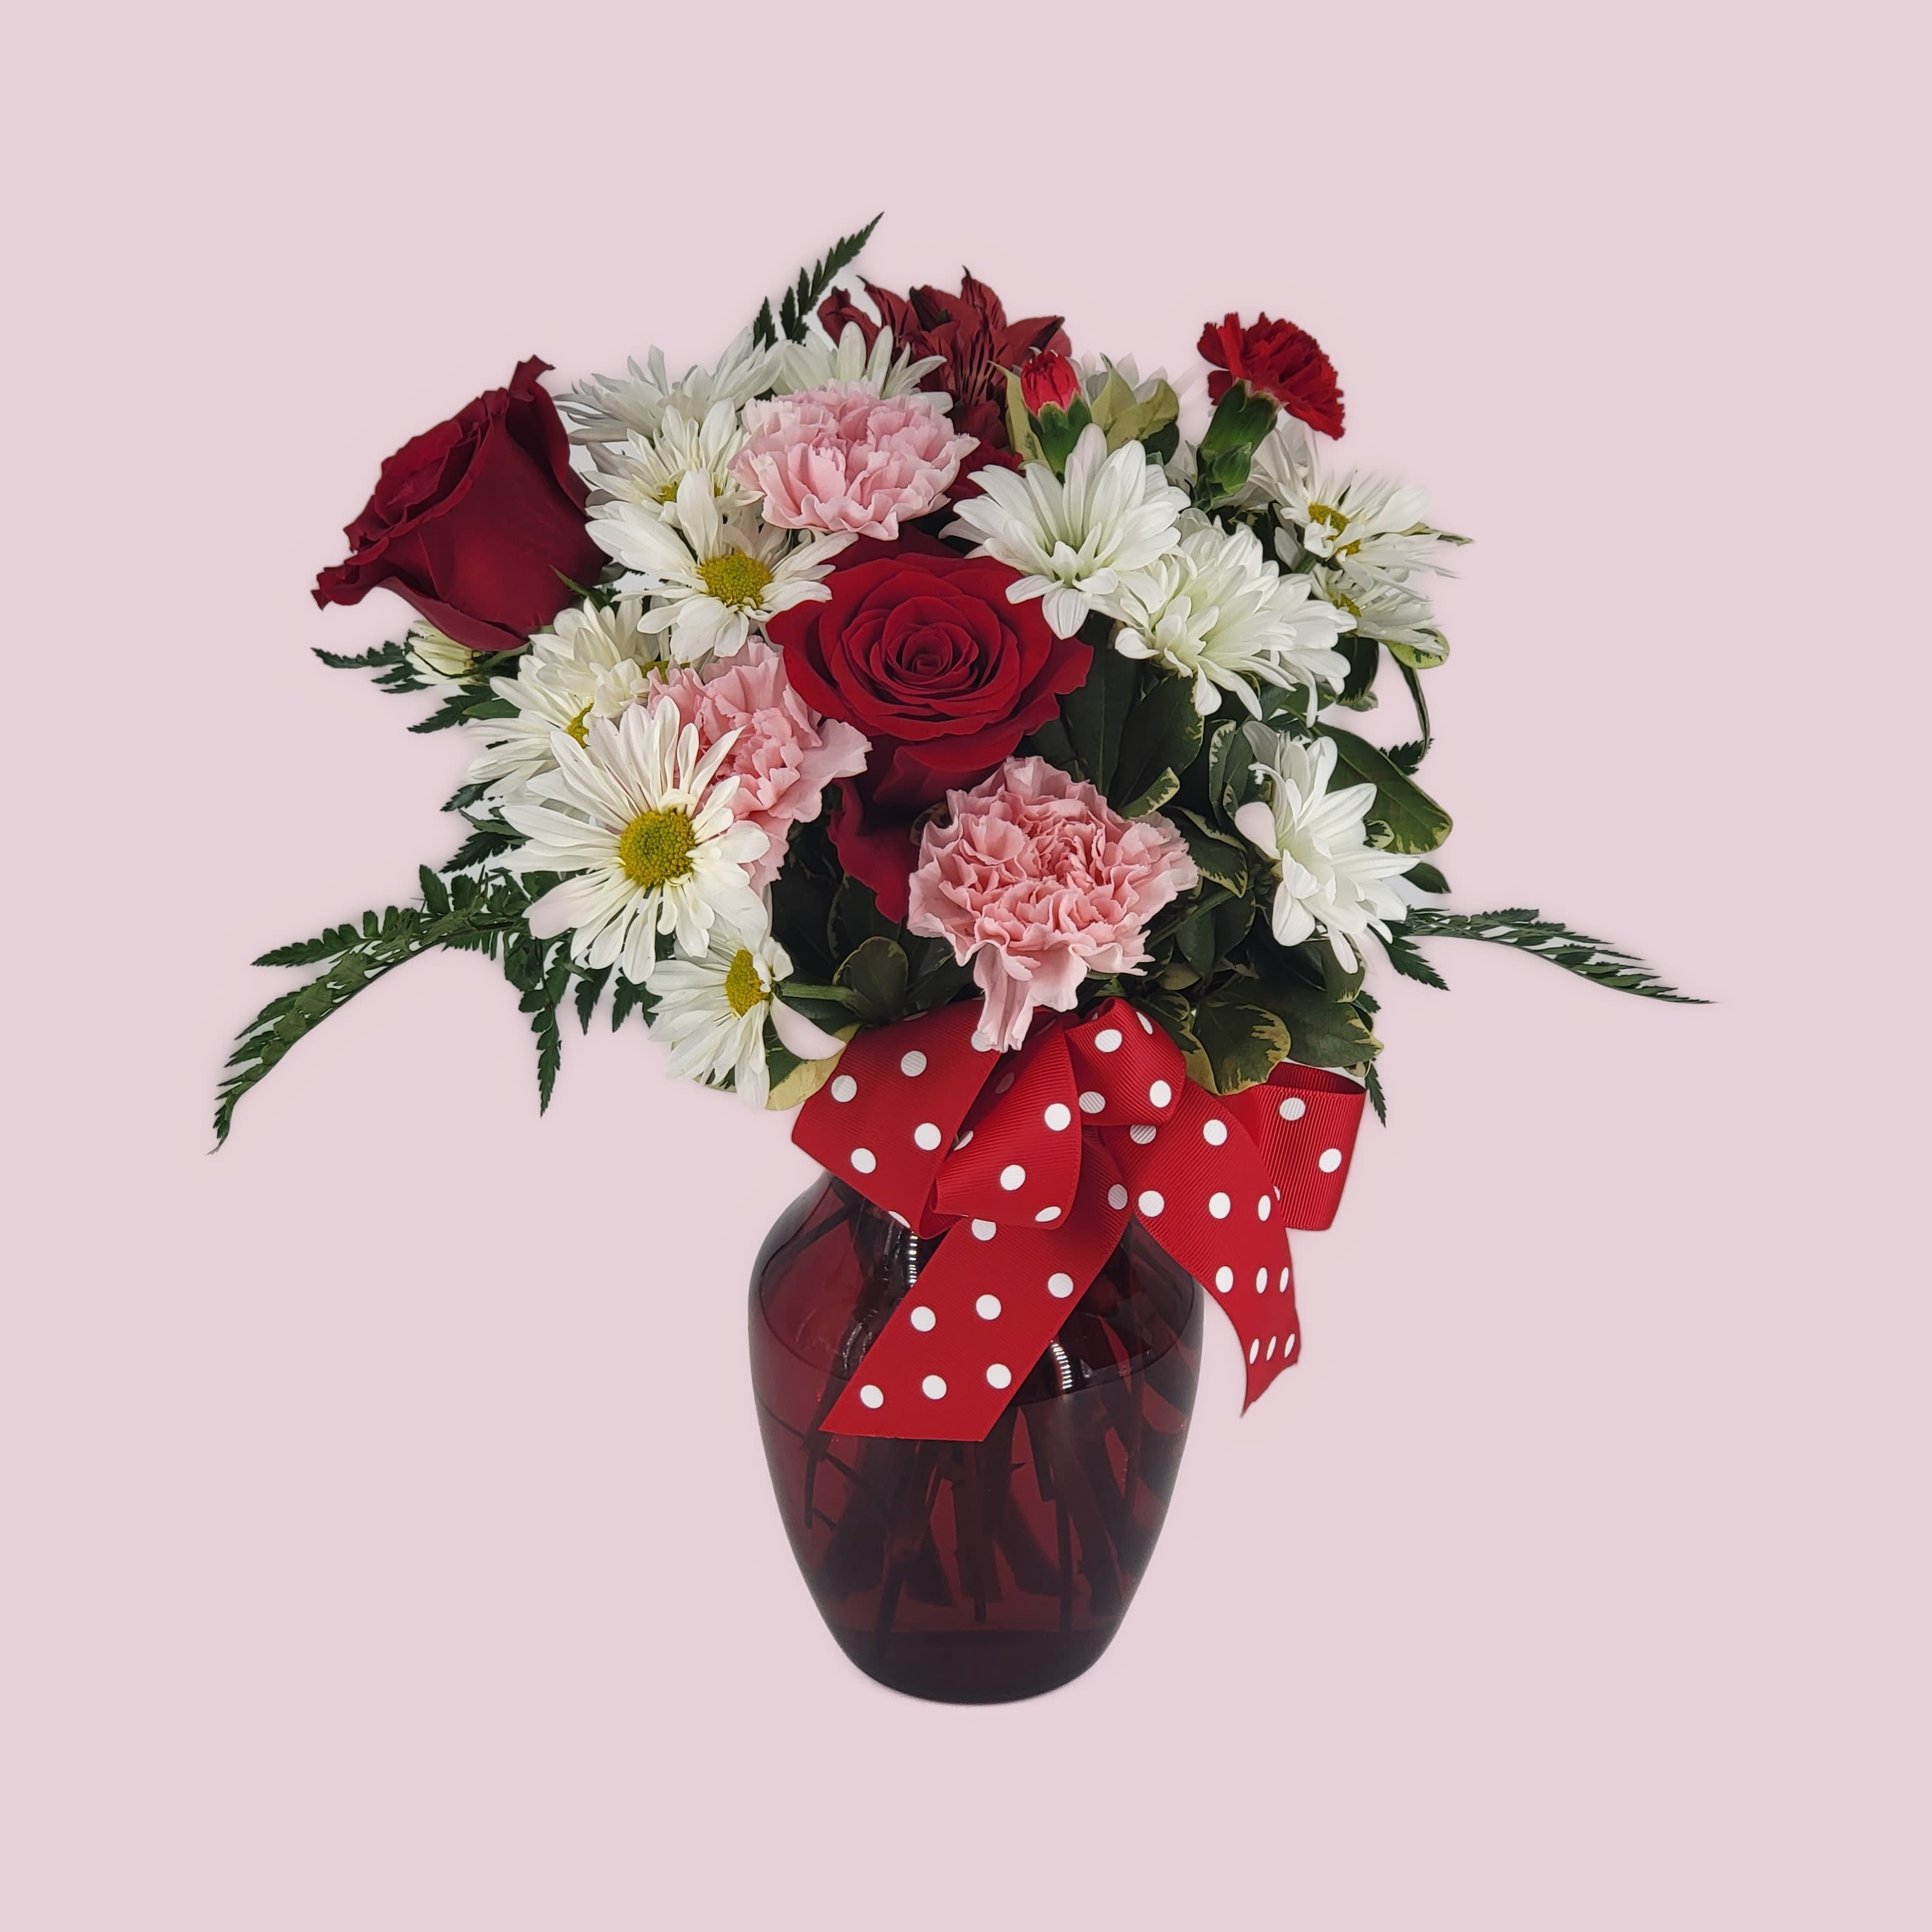 Hugs &amp; Kisses - The charming bouquet includes white daisy spray chrysanthemums, pink carnations, red miniature carnations and red roses accented with fresh greenery in a stylish red vase. Approximately 12 1/2&quot; W x 15&quot; H